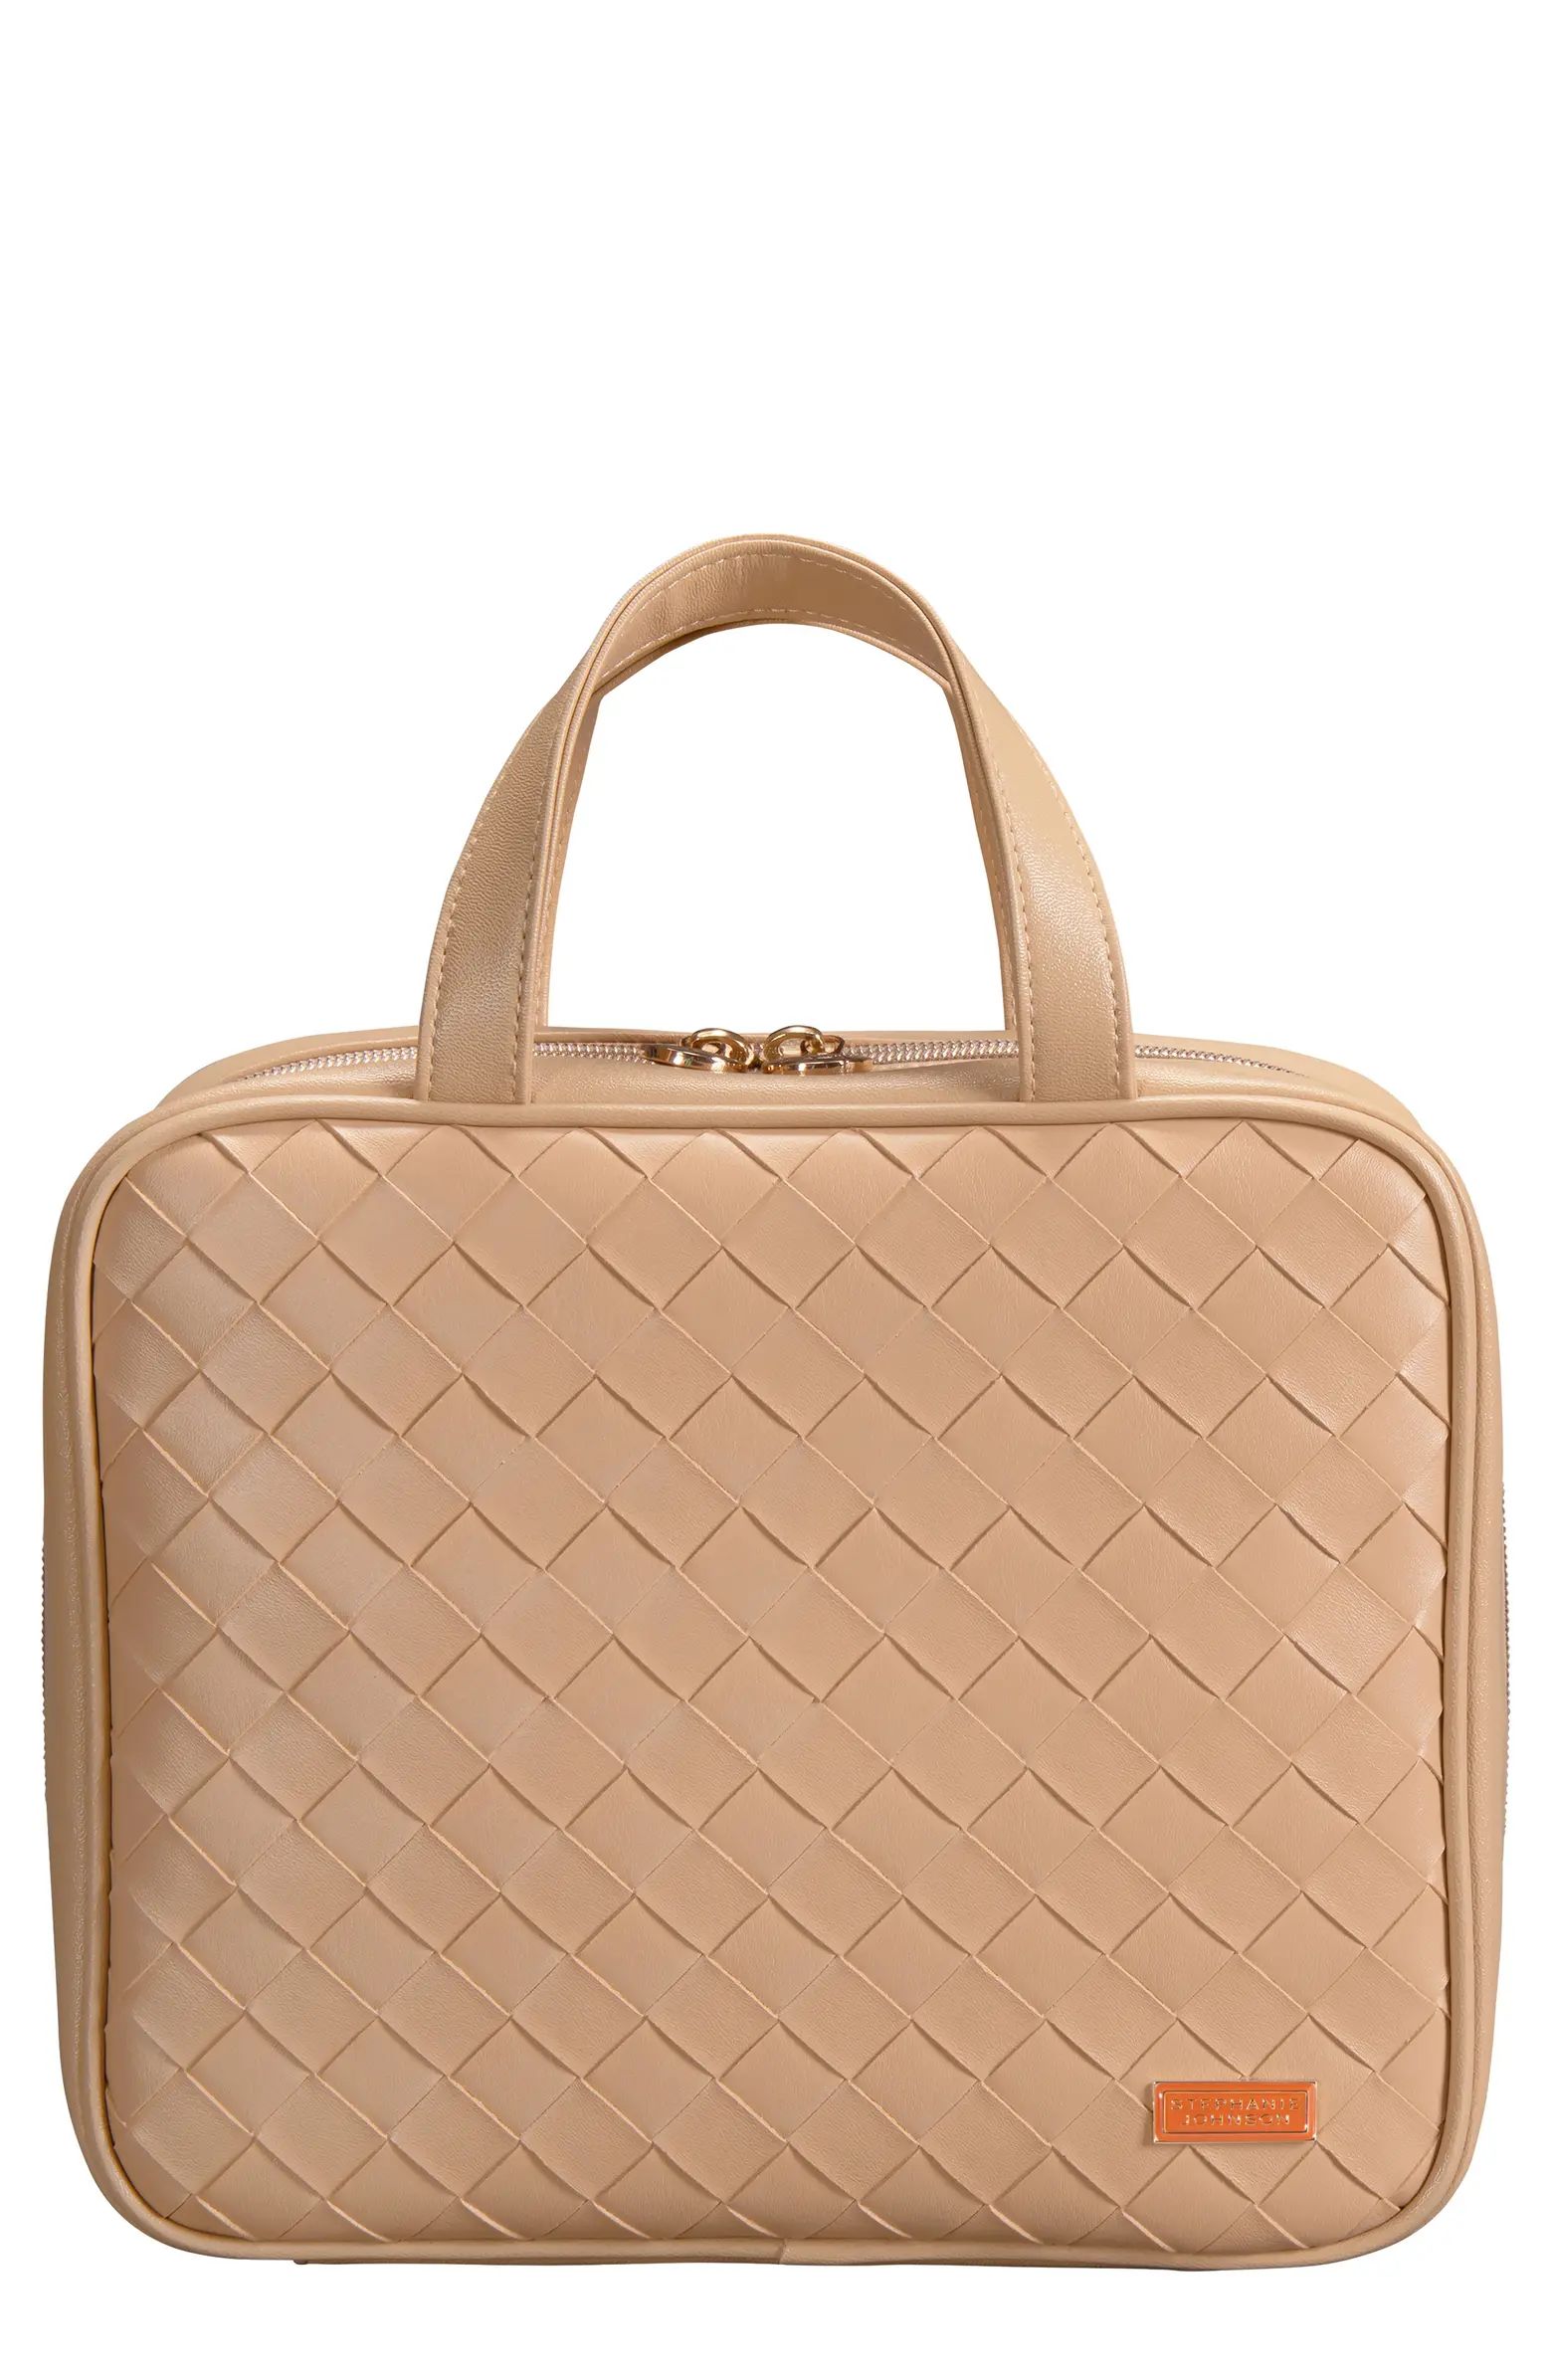 Stephanie Johnson Belize Toasted Almond Martha Large Briefcase Cosmetics Case | Nordstrom | Nordstrom